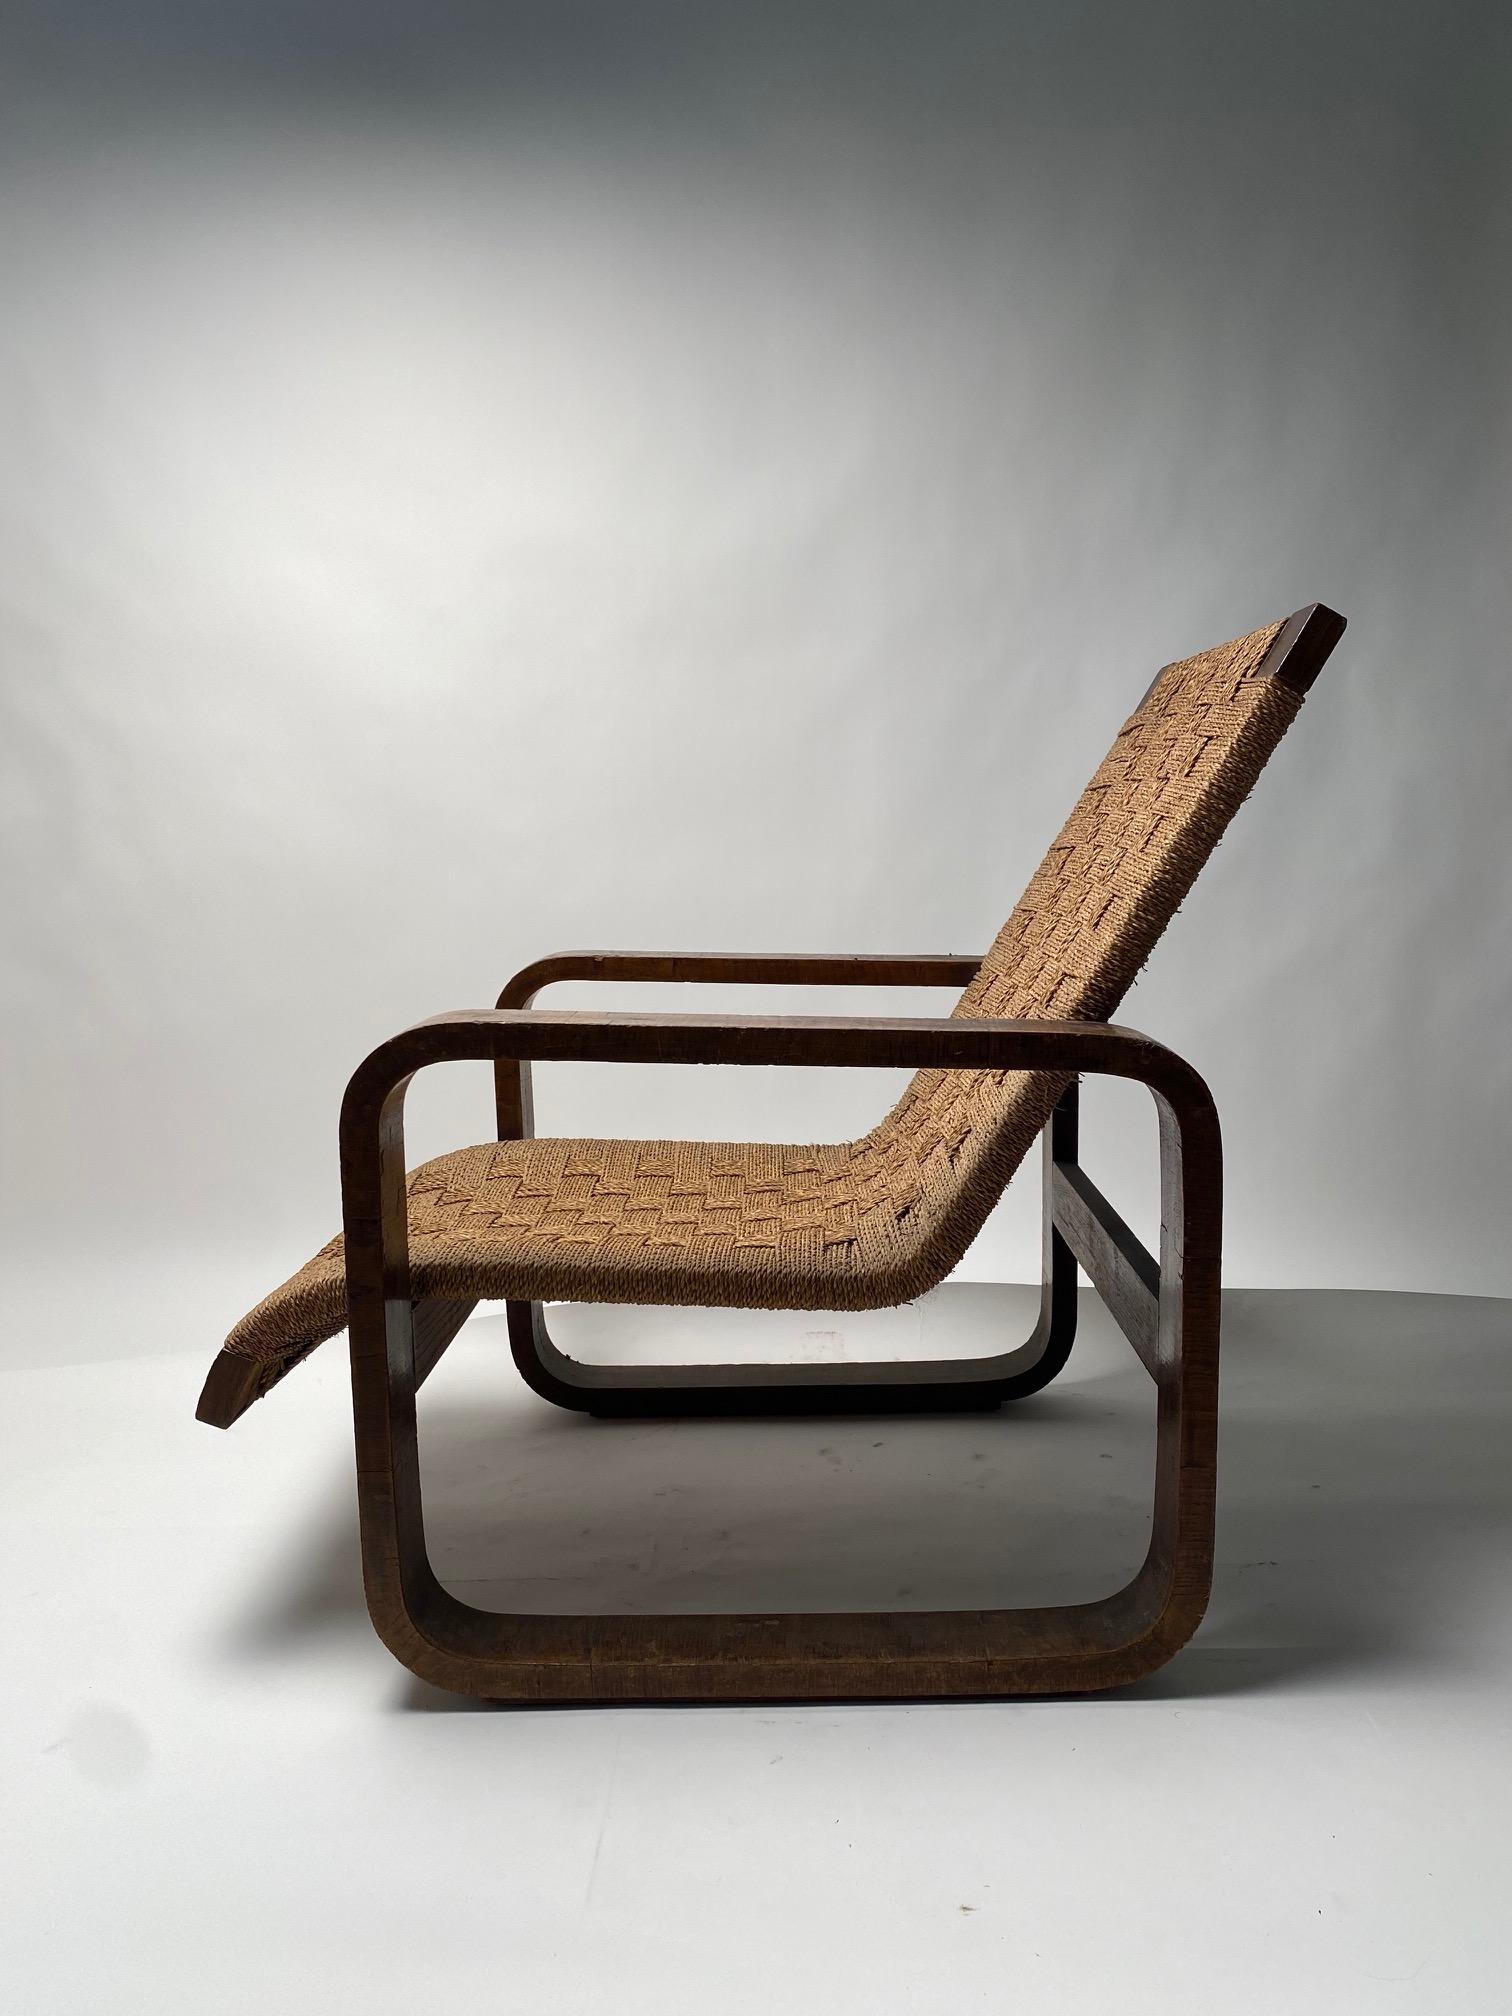 Sculptural Armchair in wood and rope, Giuseppe Pagano (Attr), Italy, 1940s For Sale 6